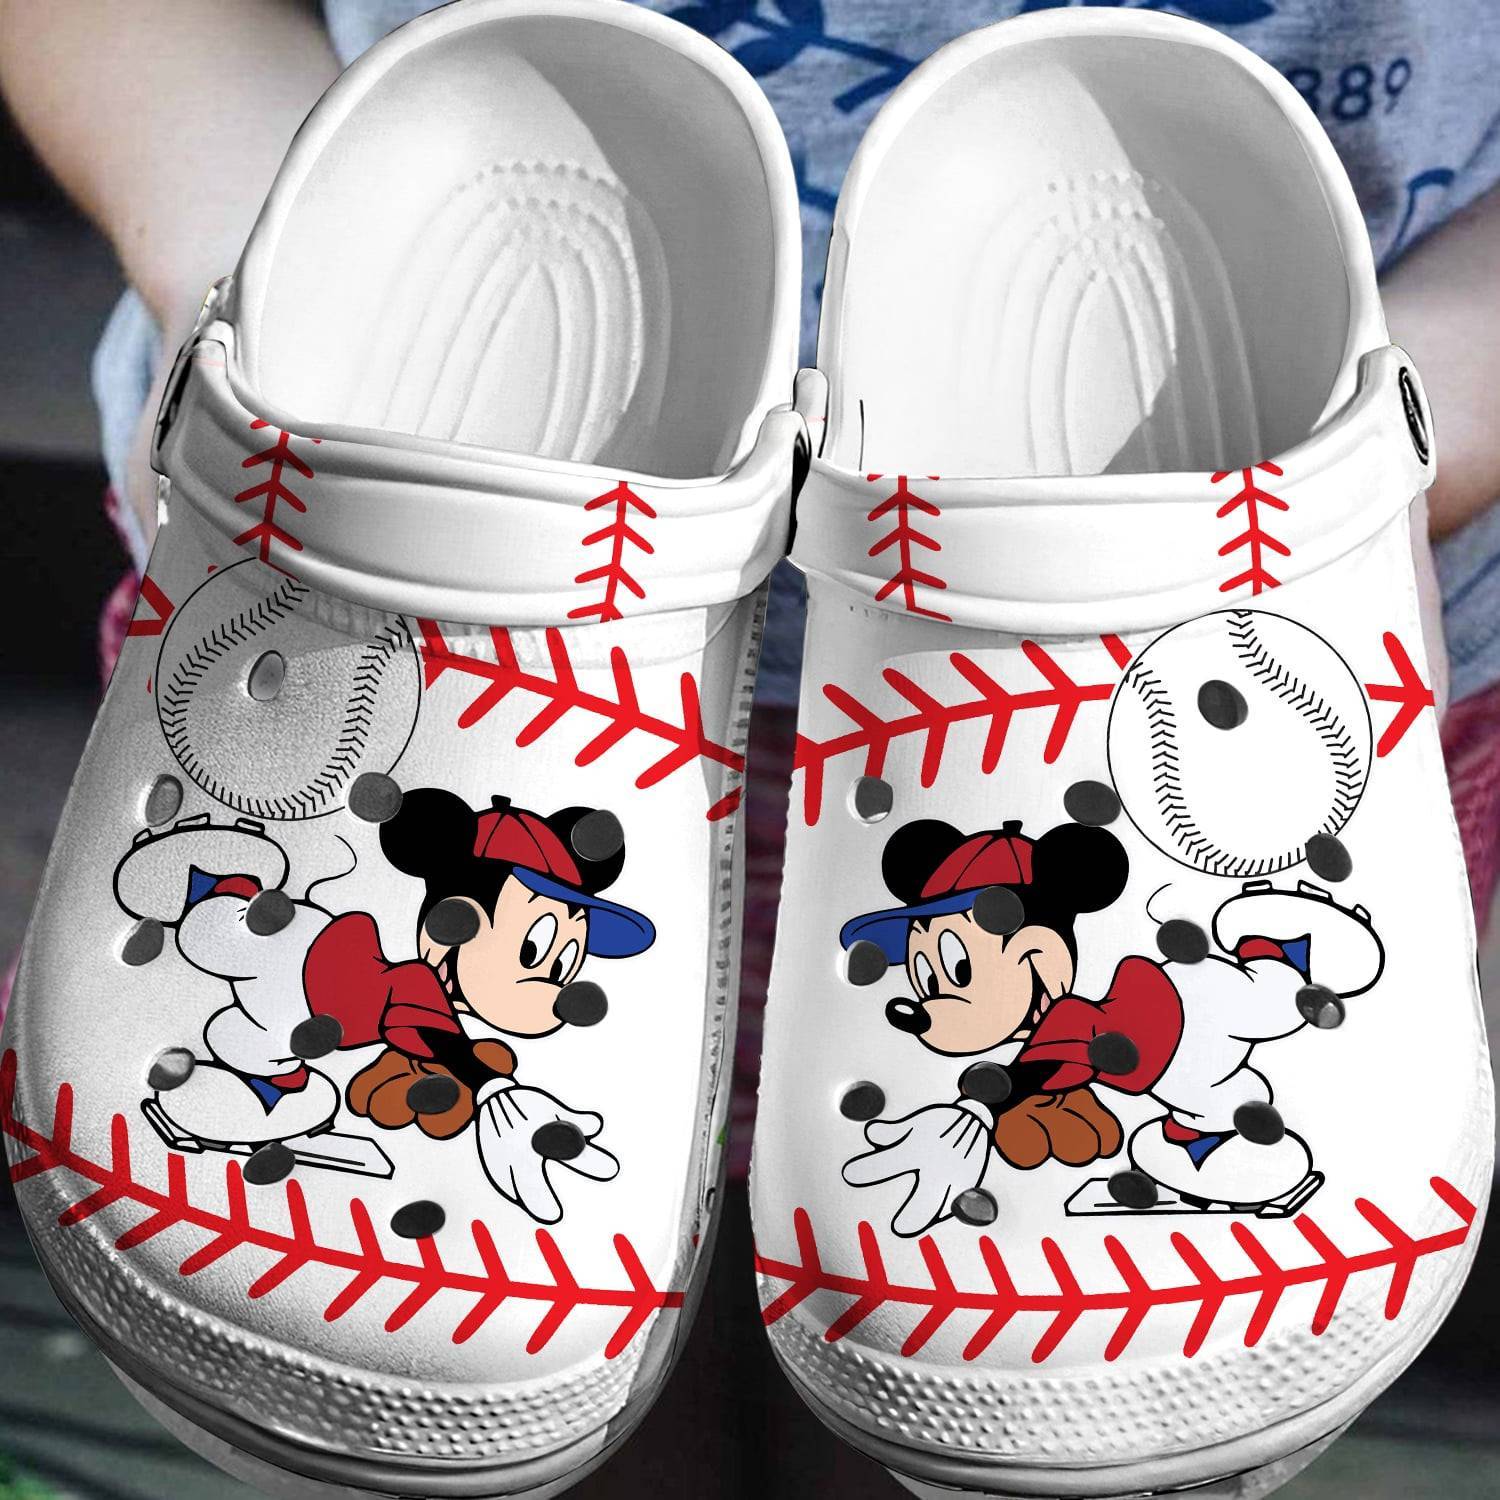 Celebrate Mickey’s Legacy with Iconic 3D Clog Shoes – Perfect for Disney Lovers